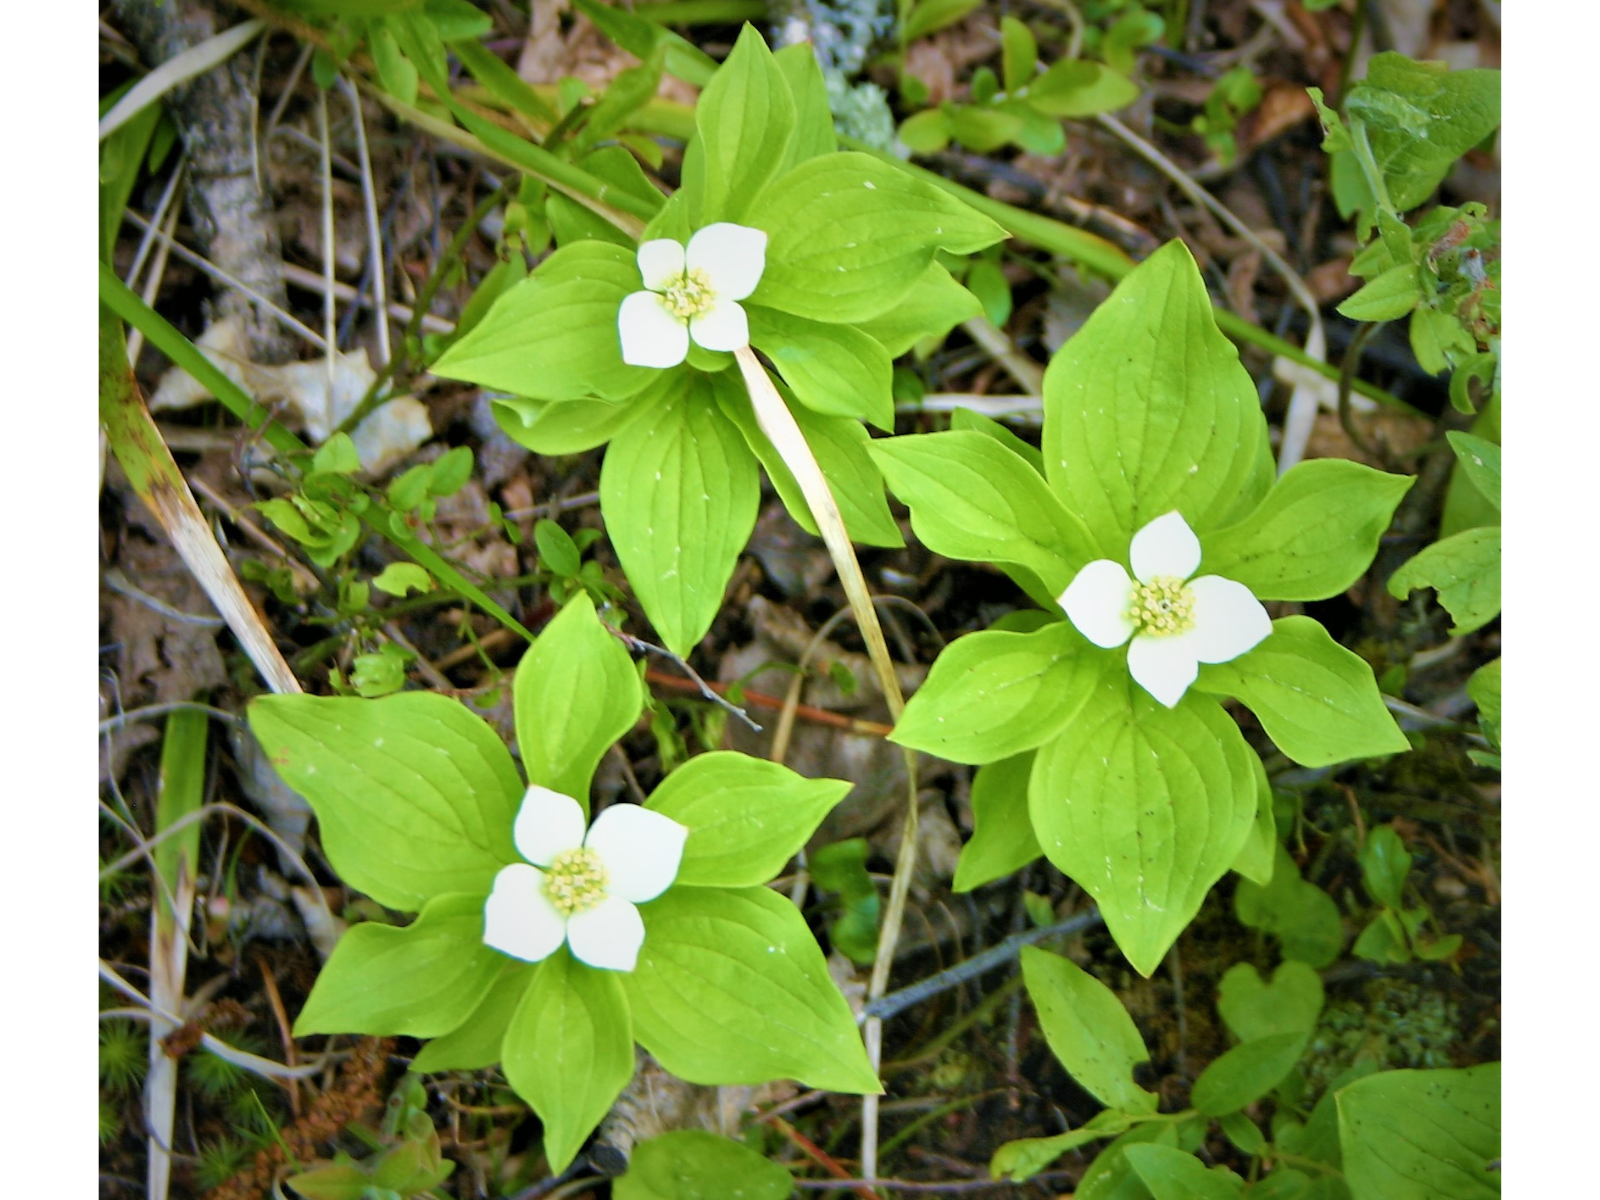 Looking down at three small plants growing from the ground. Each has several green leaves, and a single white four-petaled flower.